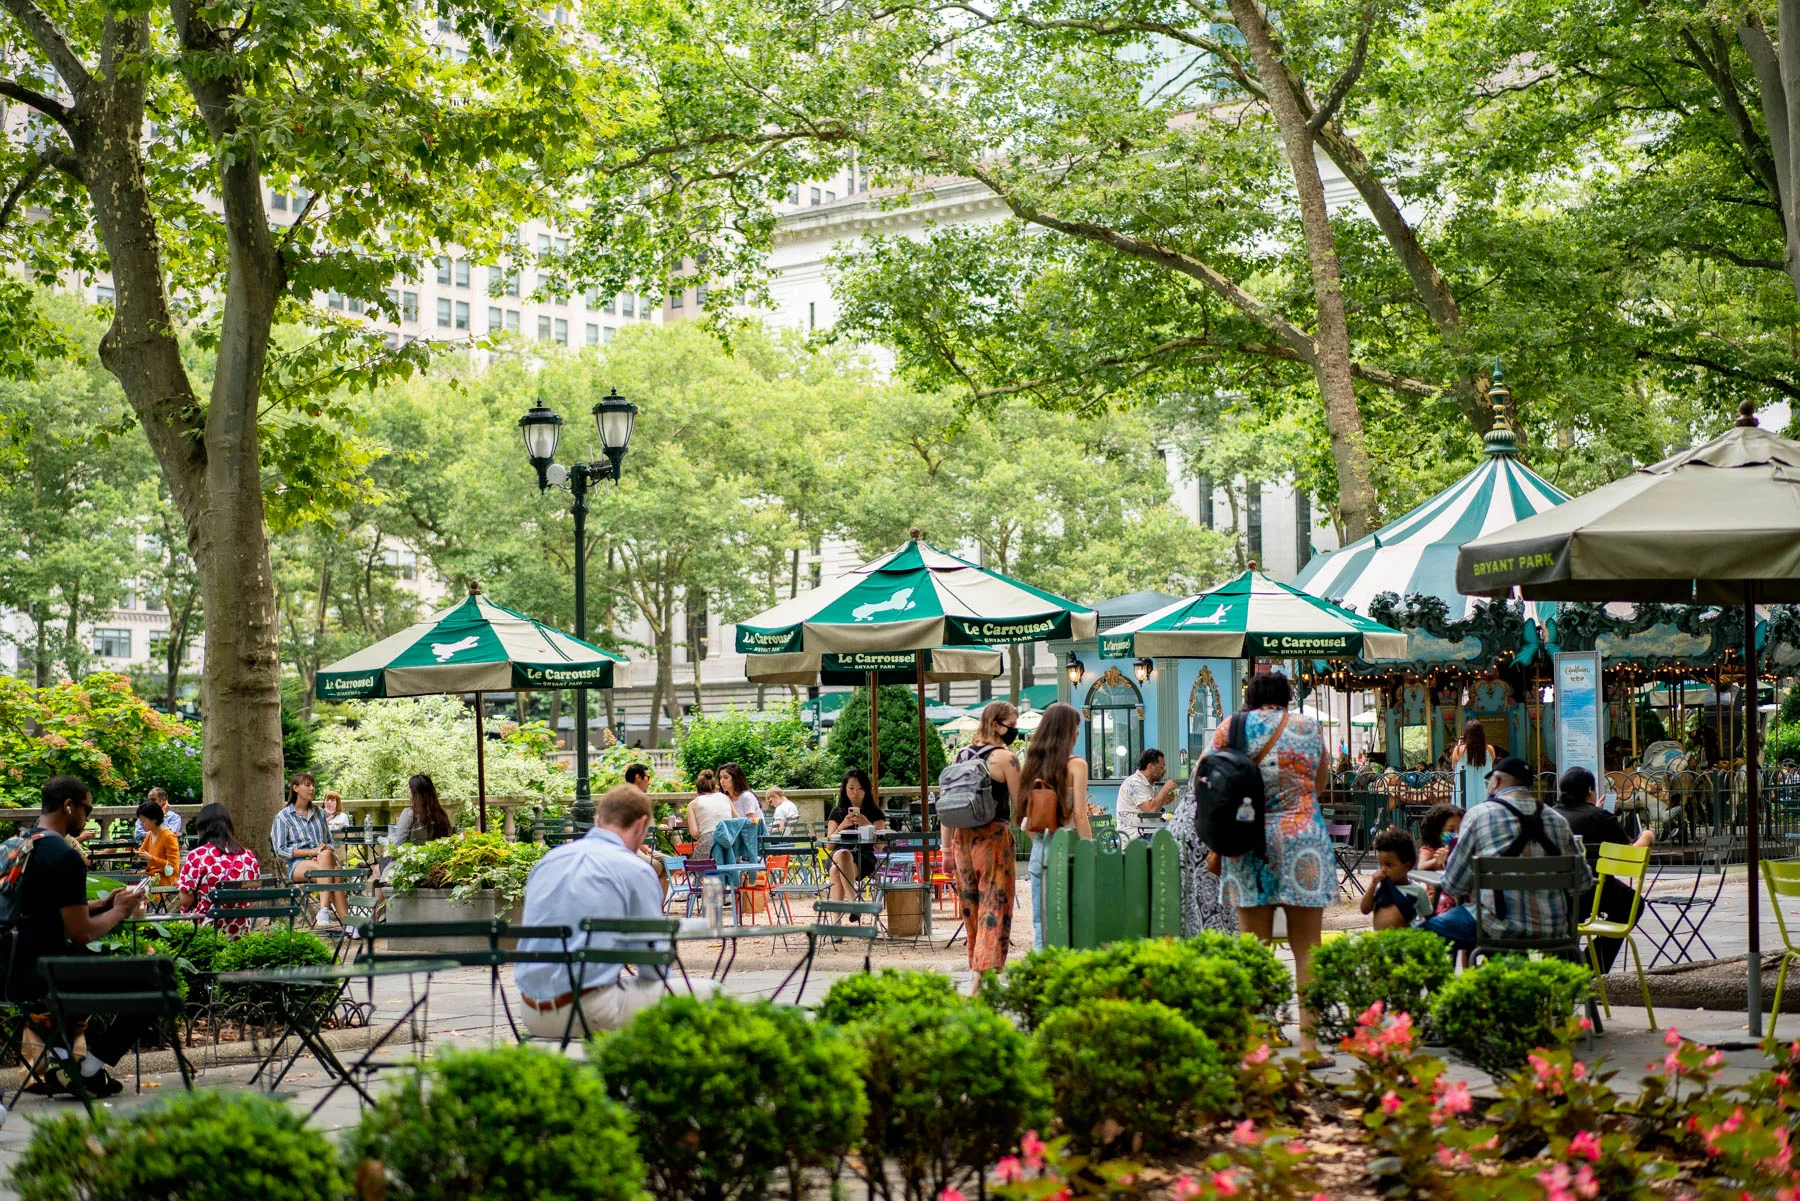 Romantic things to do in New York City